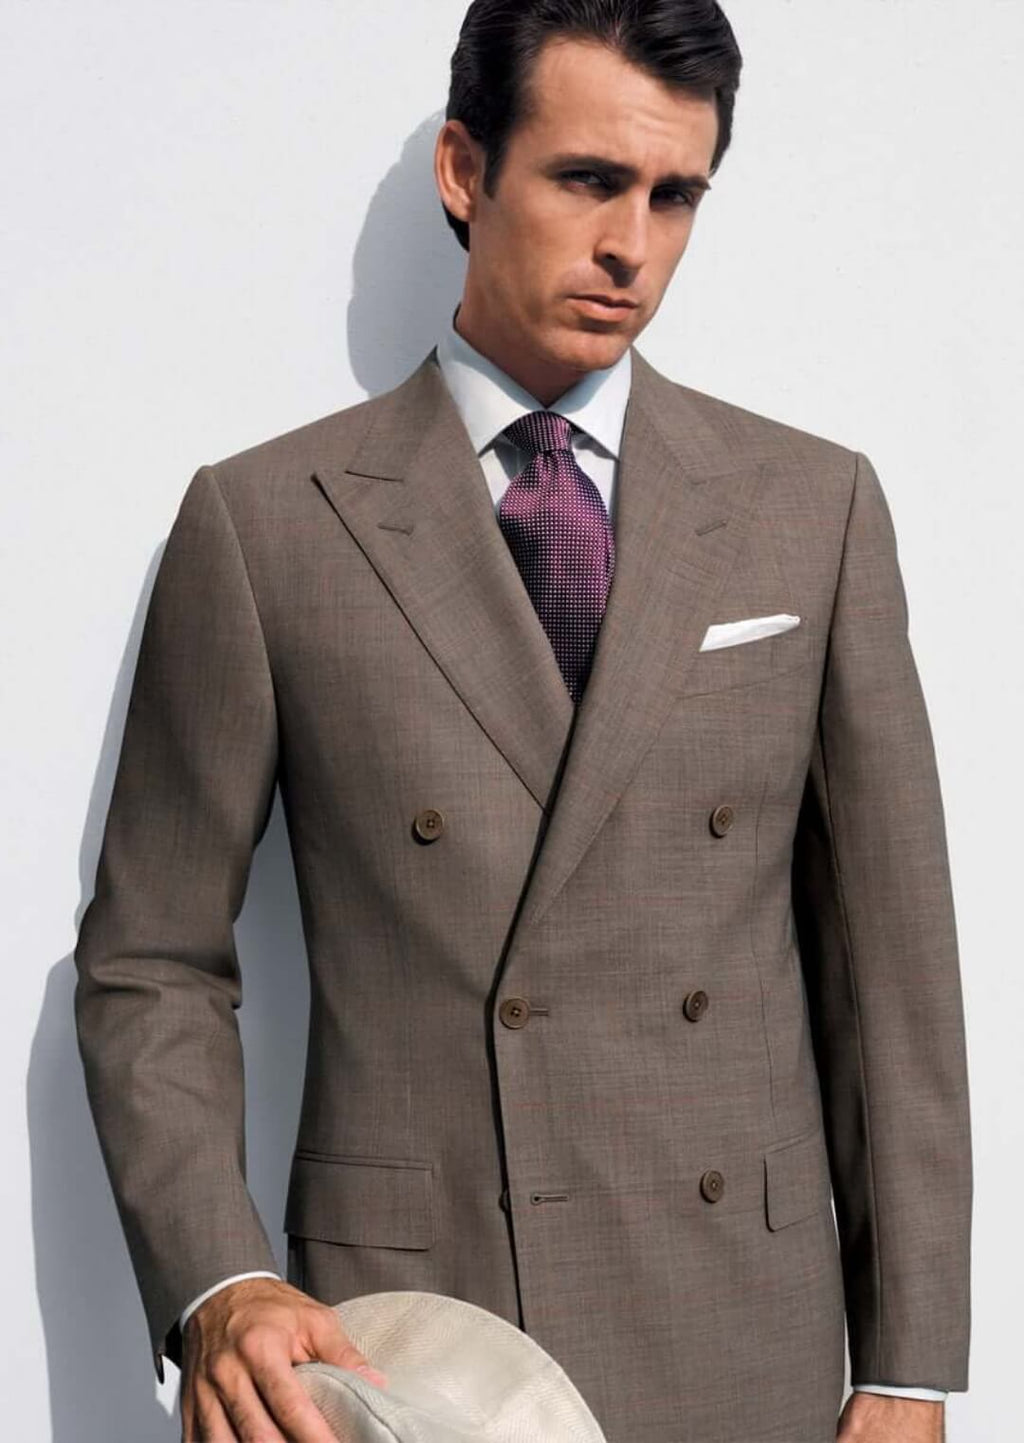 Traditional Suit Trend 23